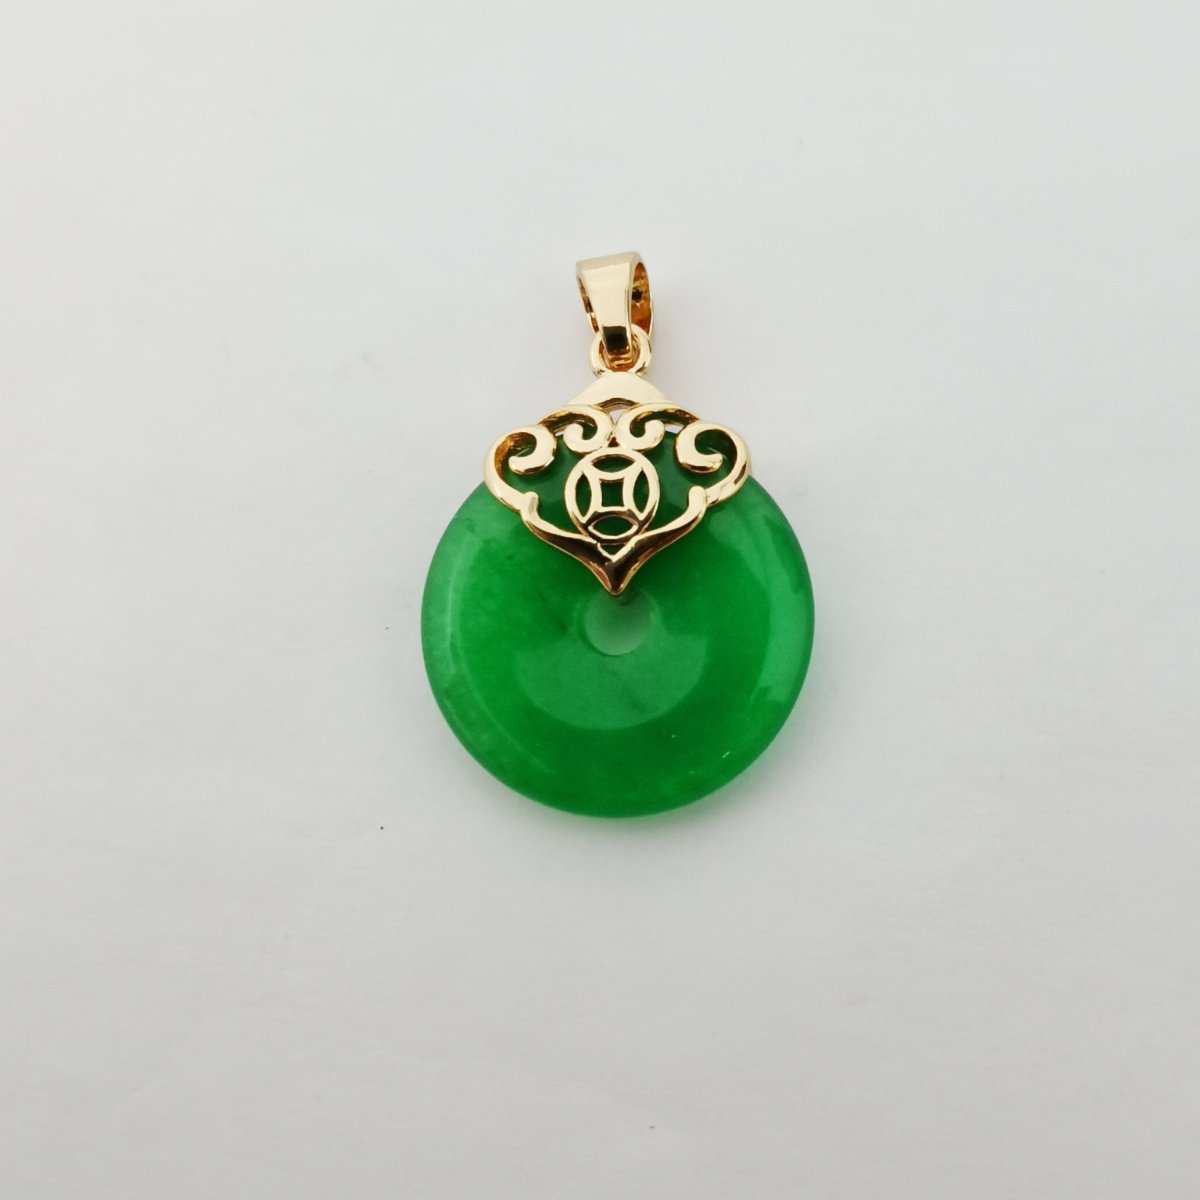 14k Gold Filled Heart with Round Jade Stone charm, Green Donut Stone Pendant, Jade Stone Pendant, Heart Charm Birthstone Jewelry Necklace O-131,O-148 - DLUXCA